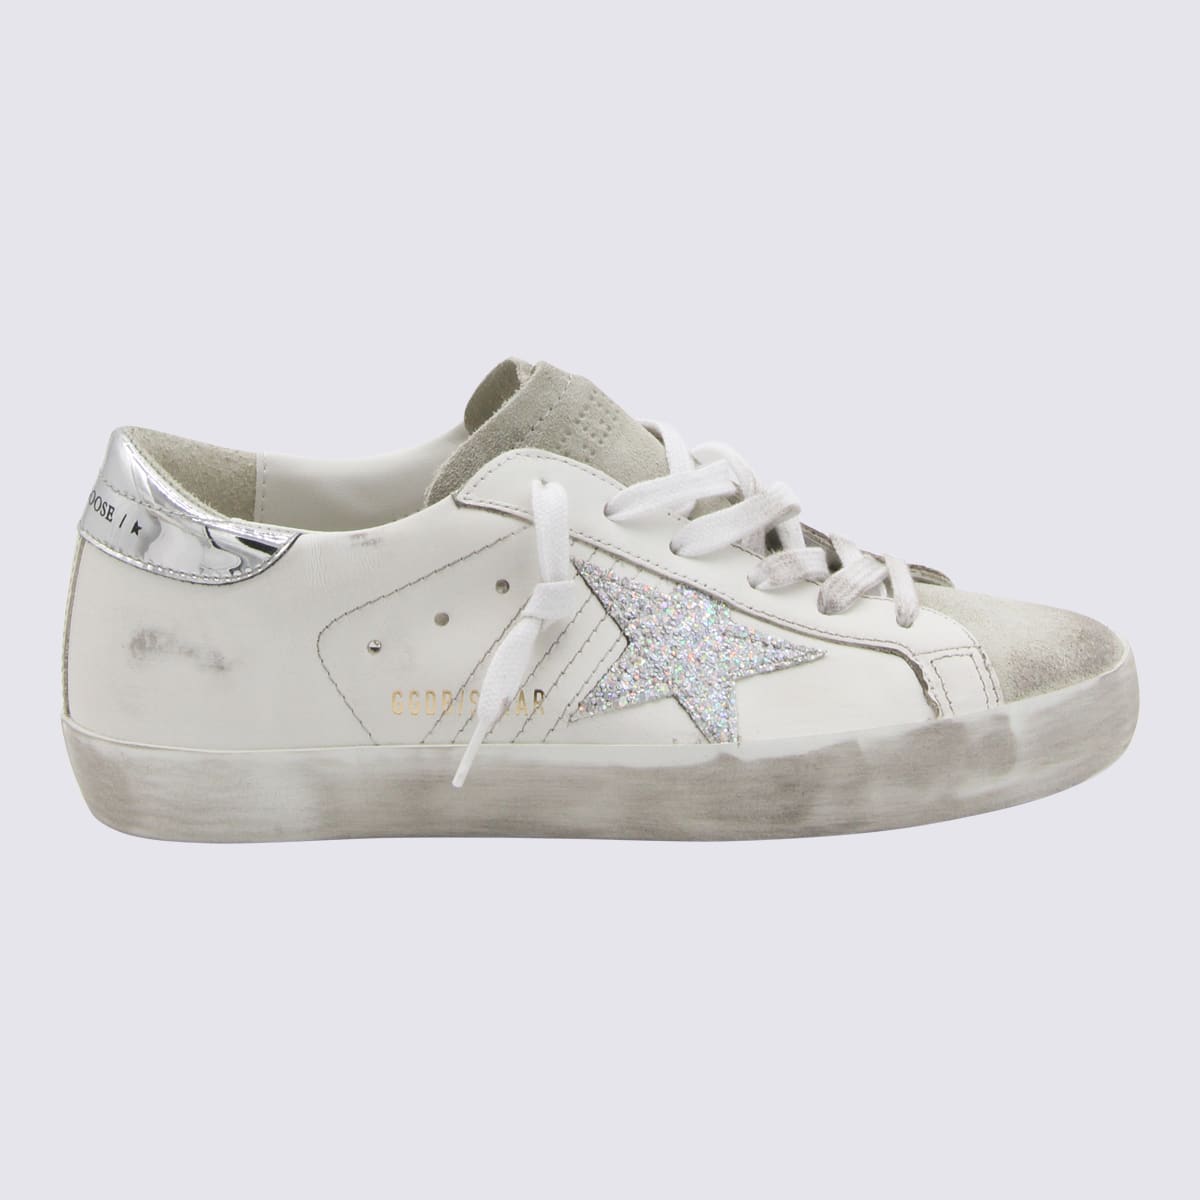 GOLDEN GOOSE WHITE LEATHER SUPER STAR SNEAKERS